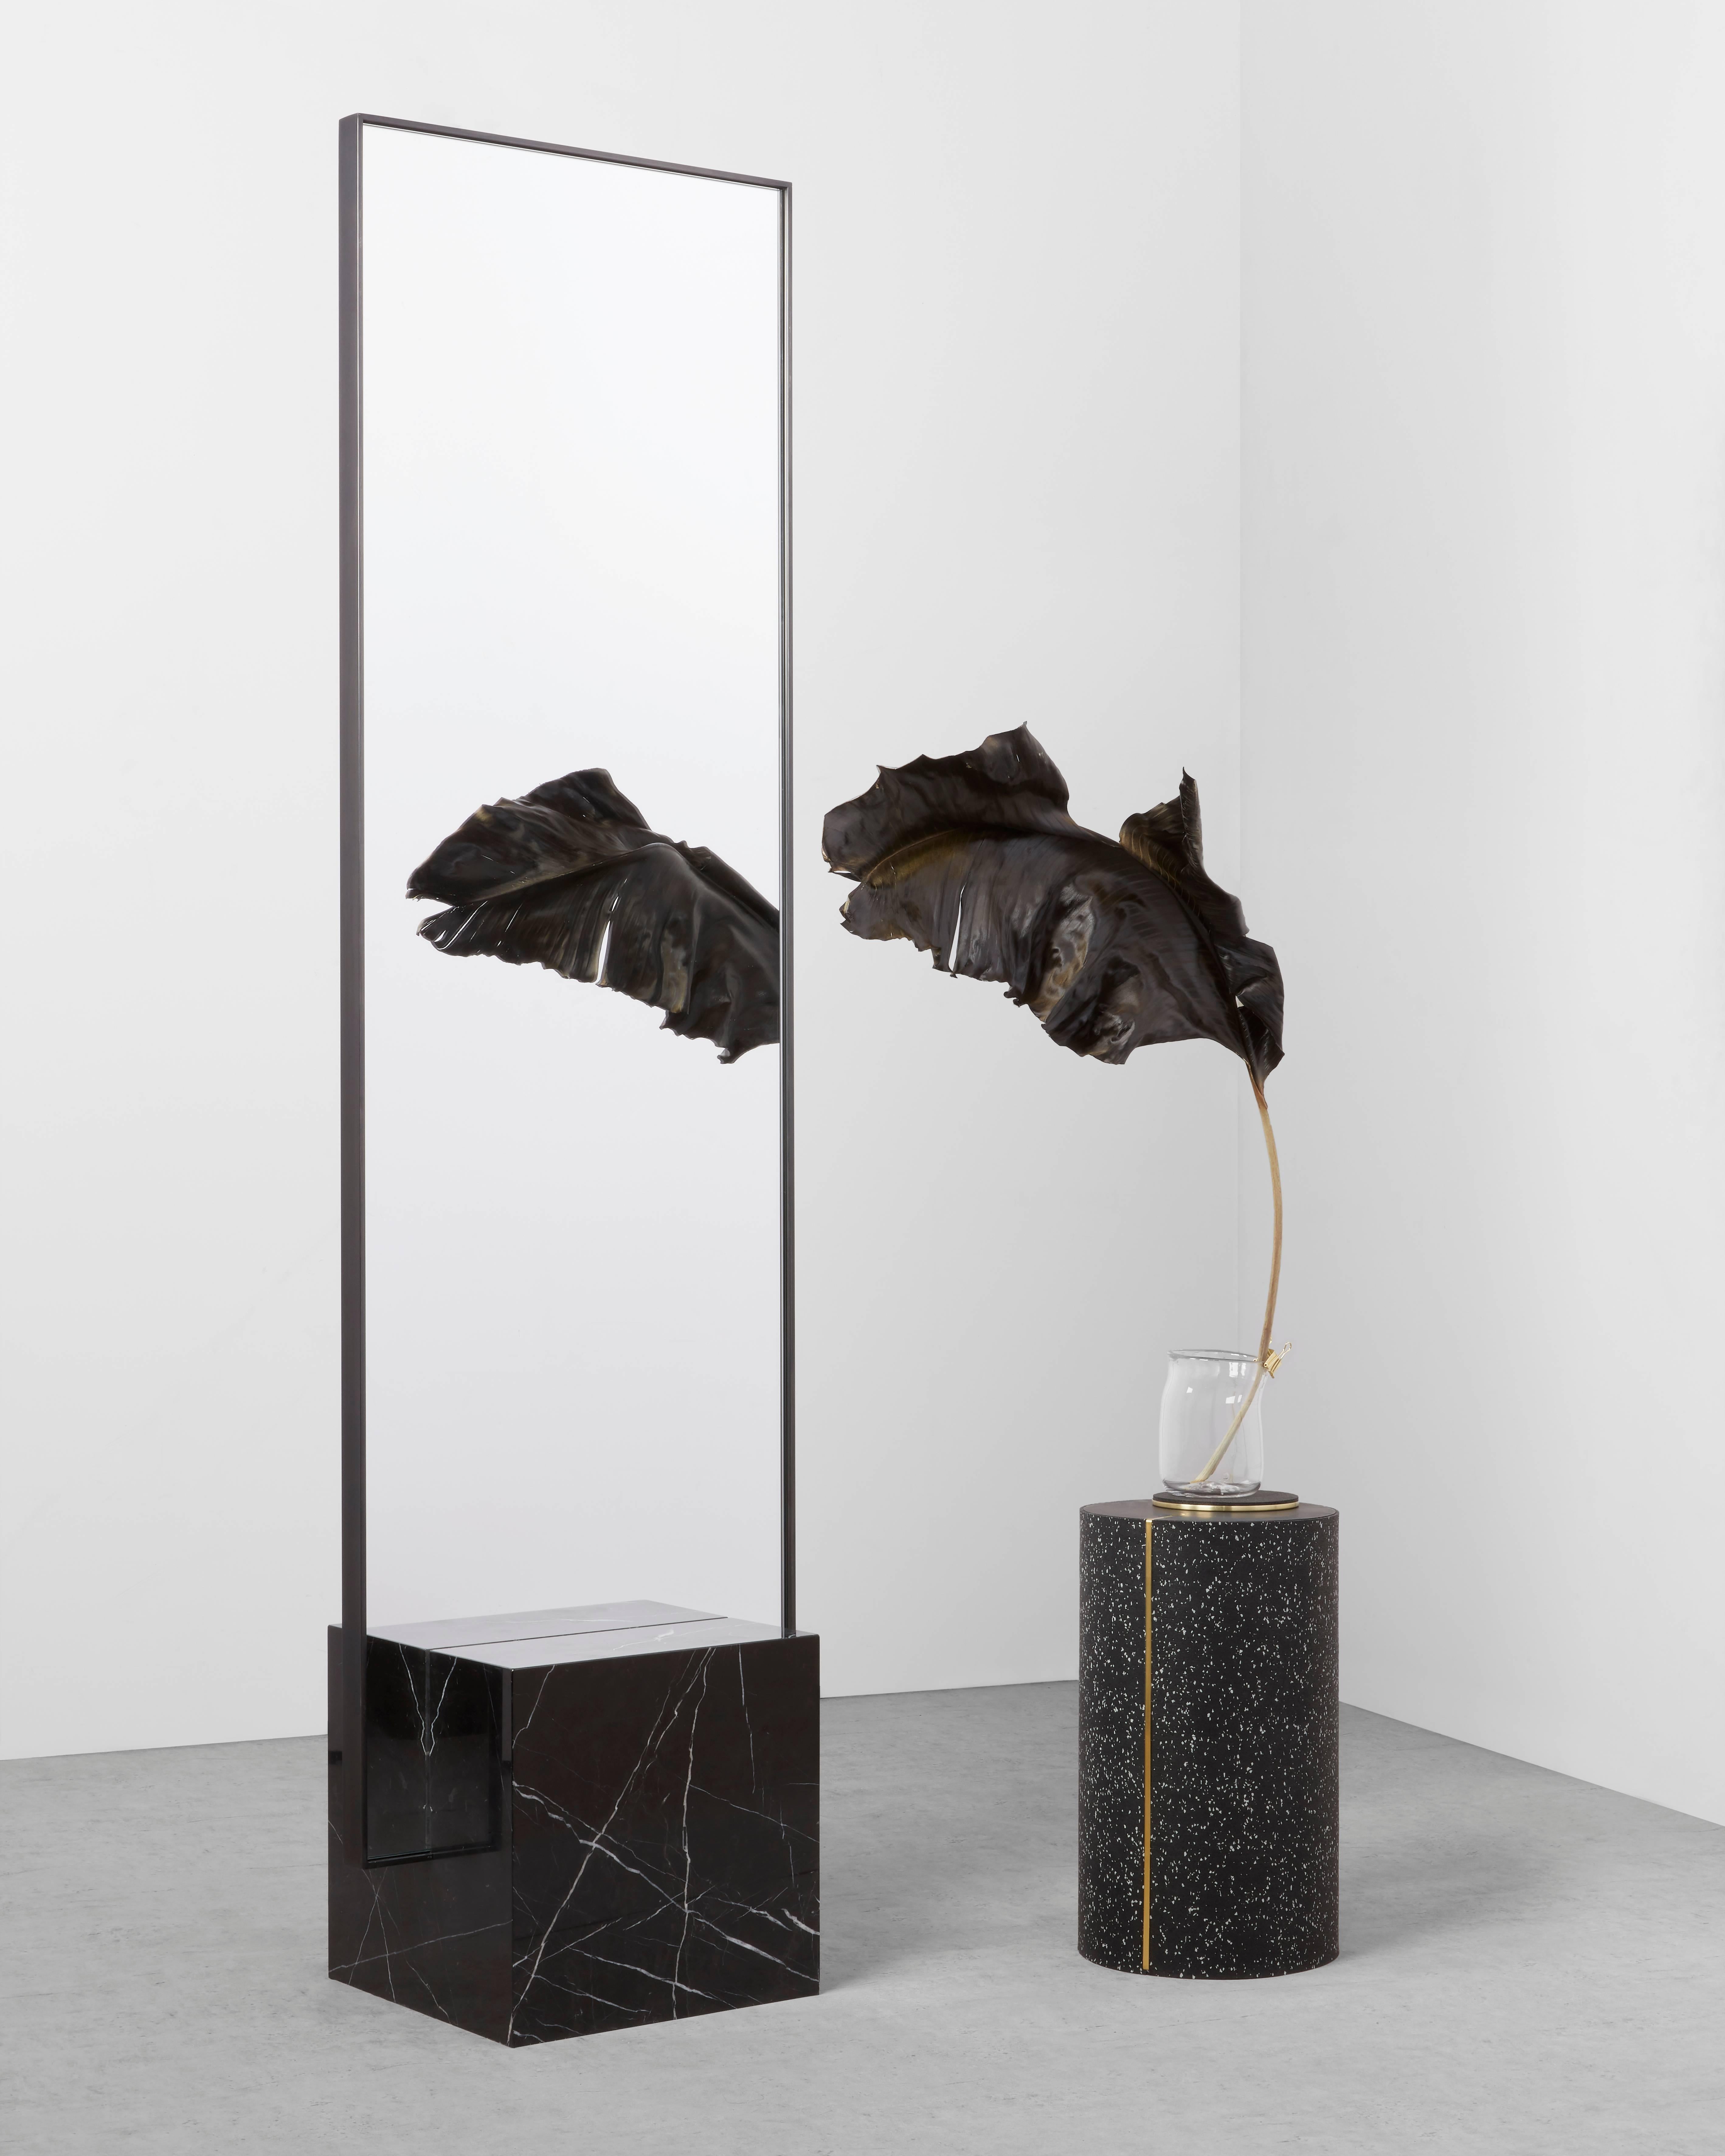 Nero Coexist Standing Mirror with Black Concrete Rubber CYL and Black Marble (amerikanisch) im Angebot